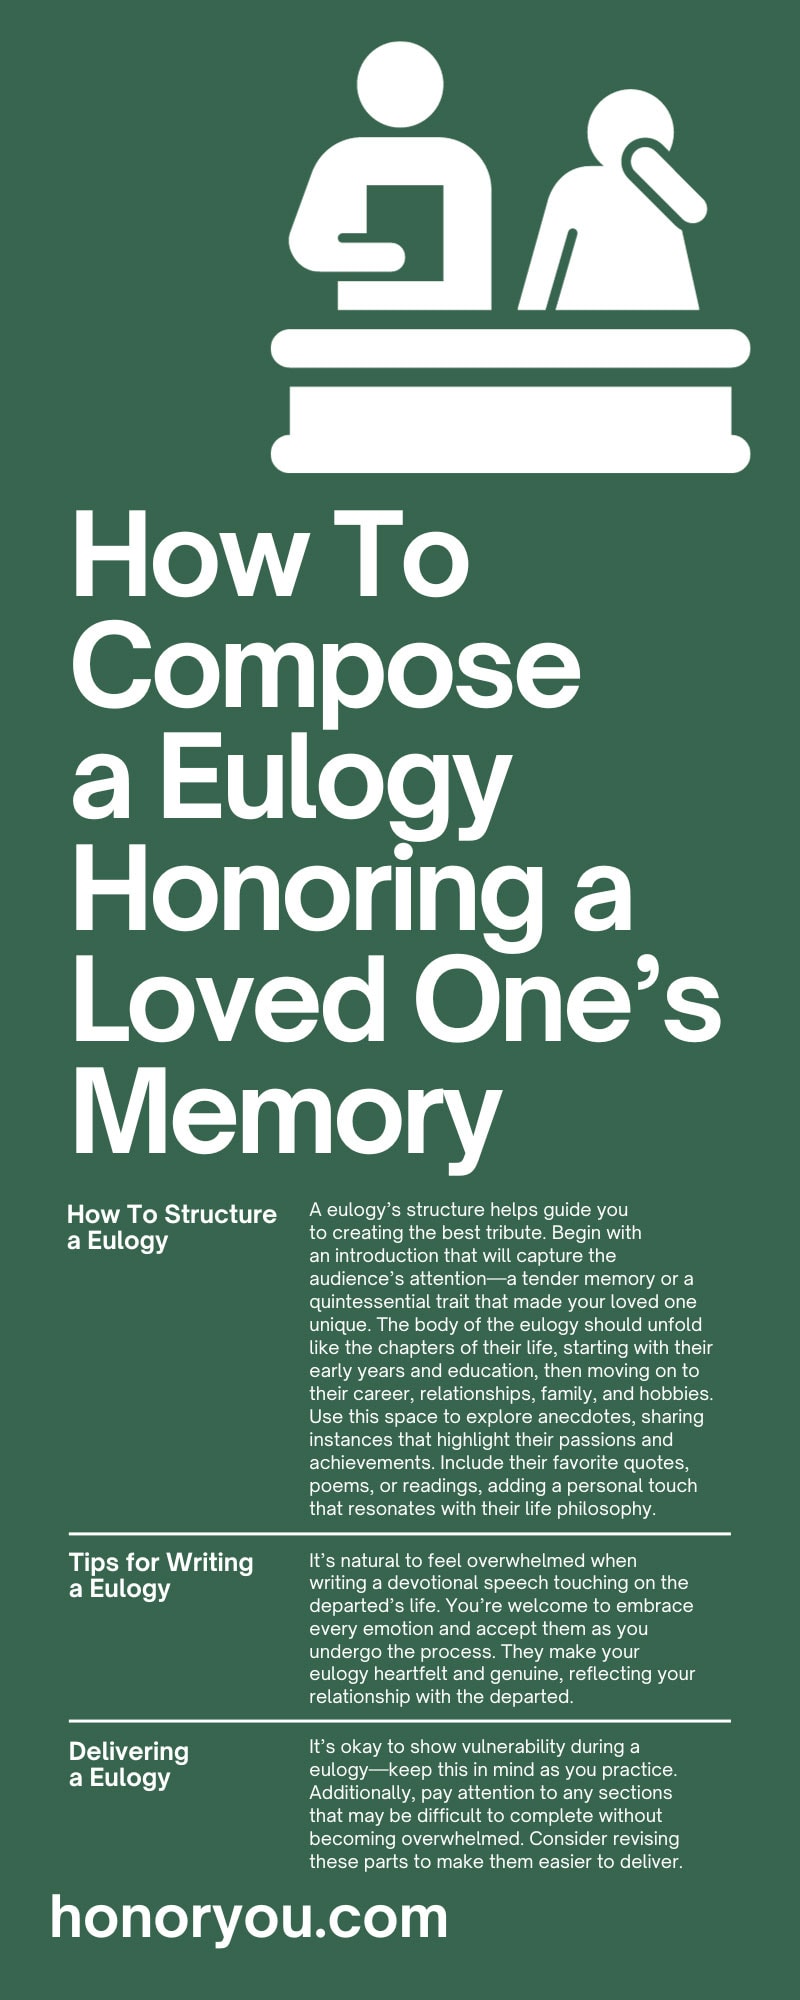 How To Compose a Eulogy Honoring a Loved One’s Memory